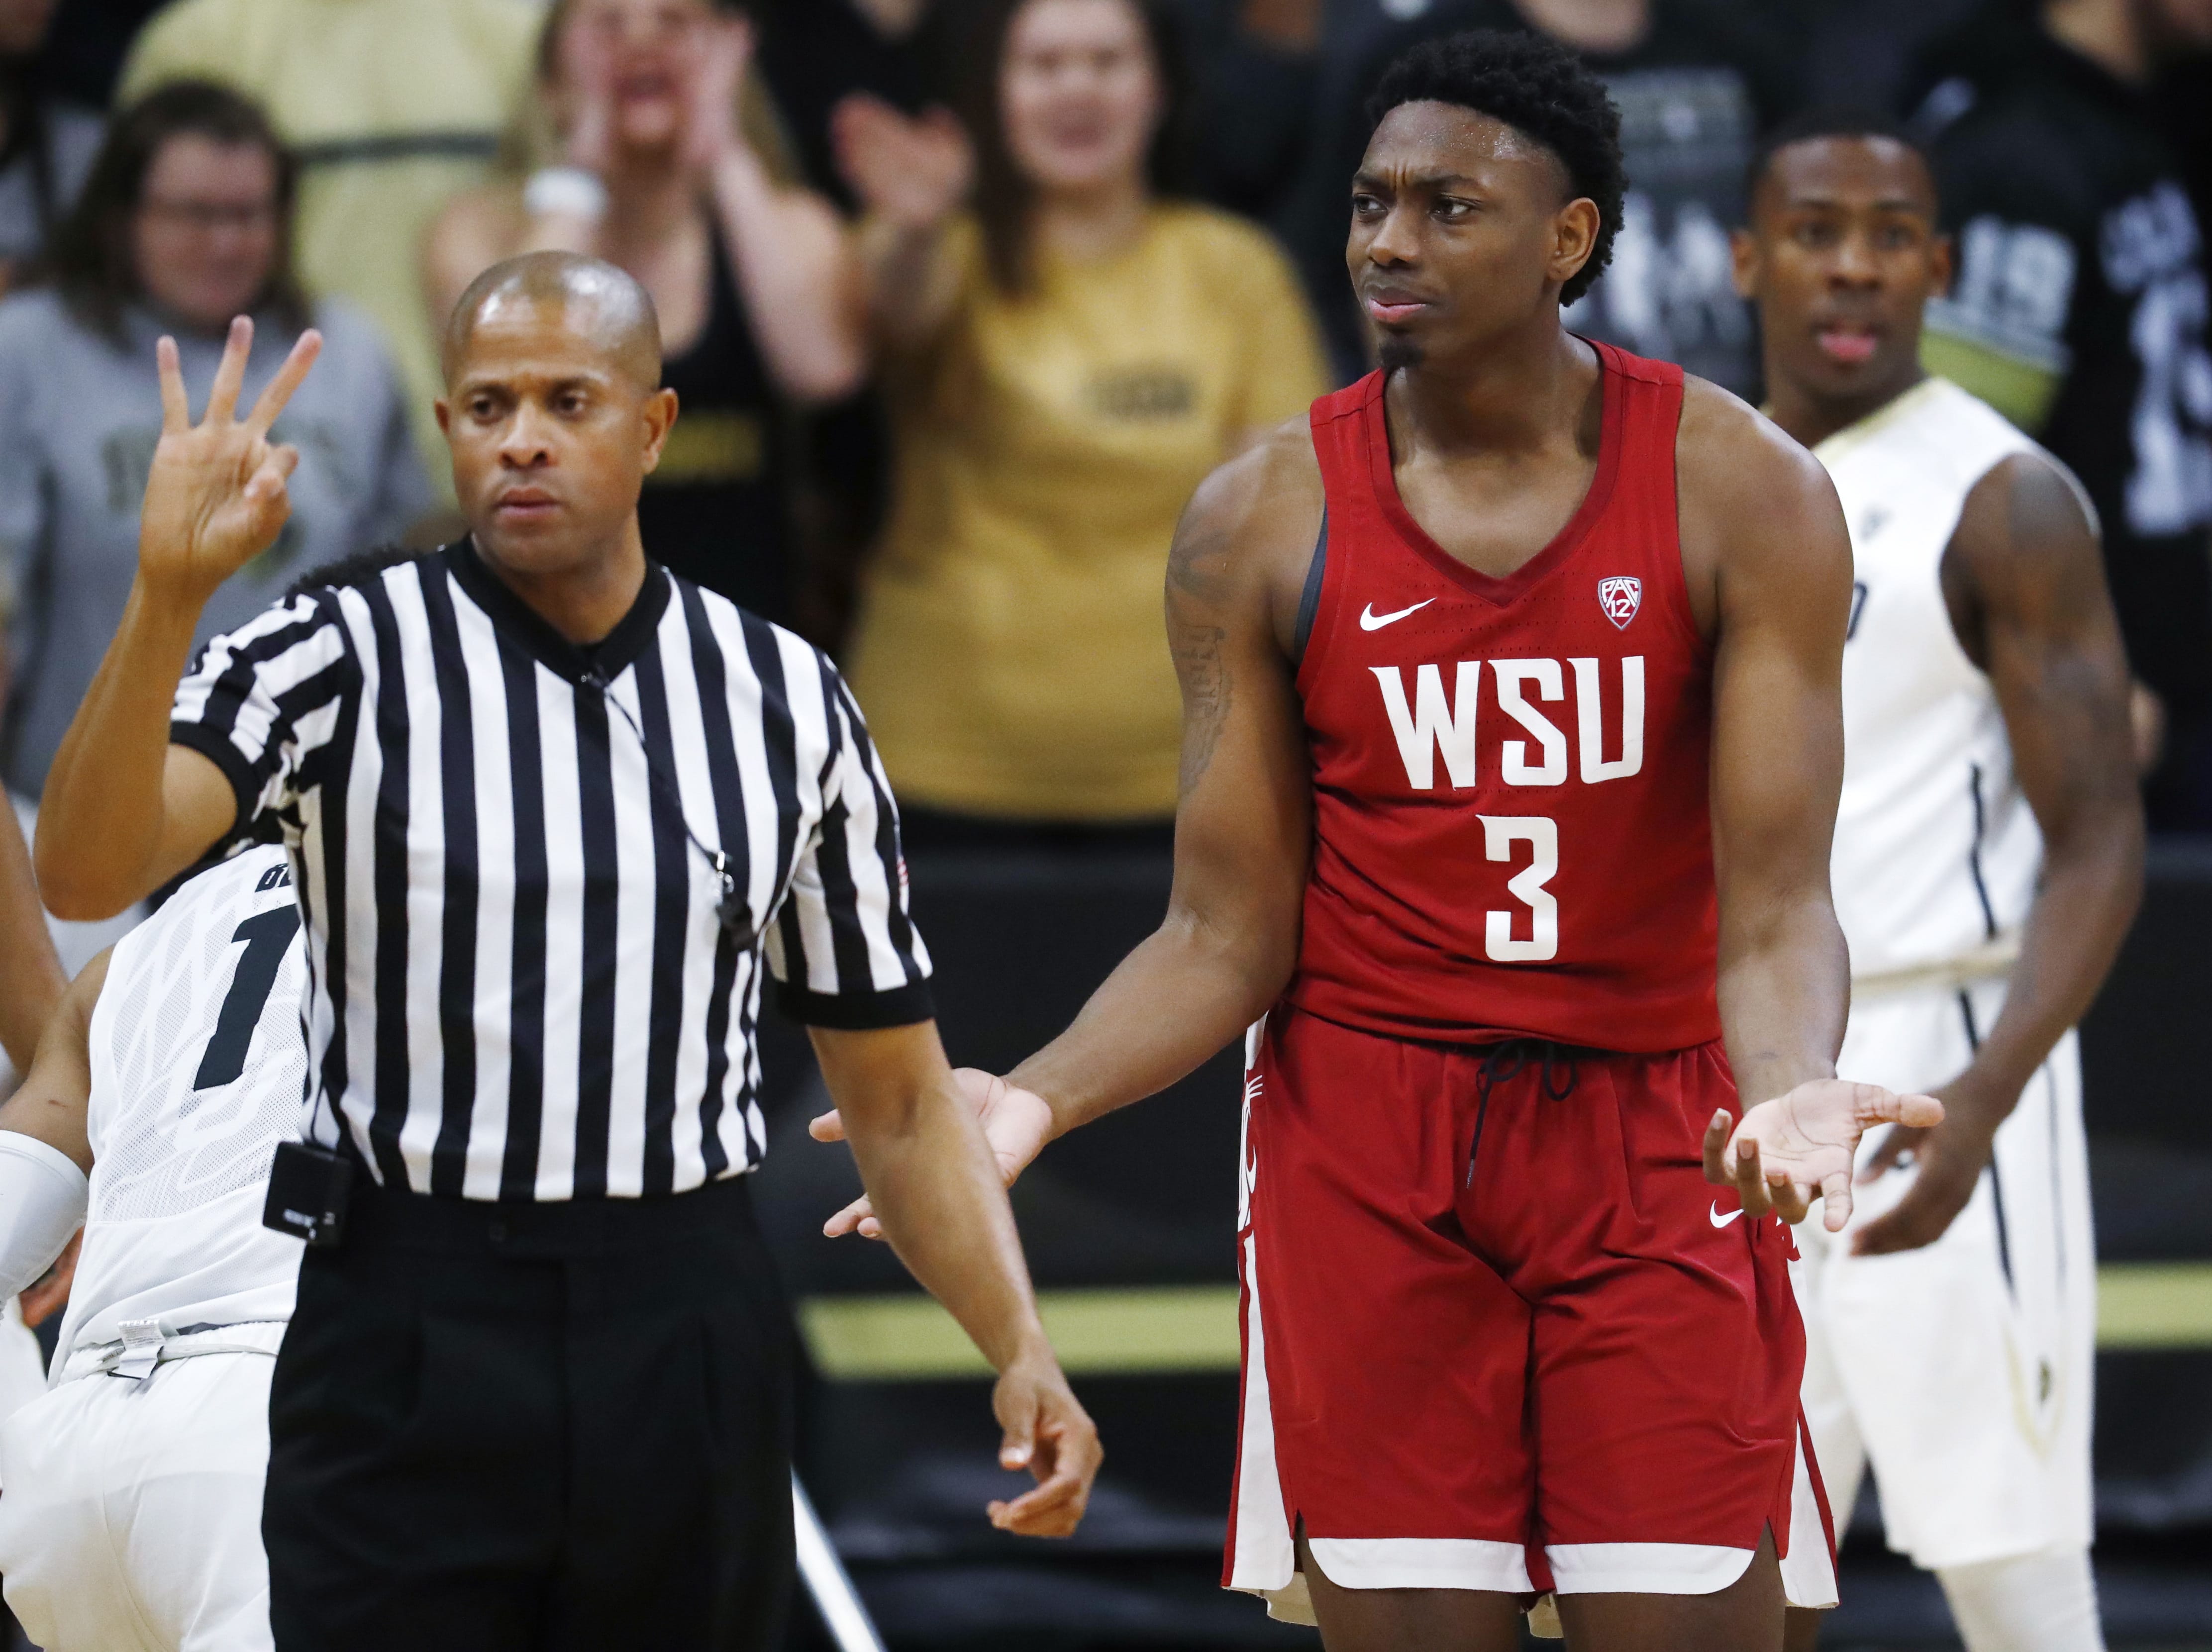 Washington State forward Robert Franks, right, argues with a referee after he was called for charging against Colorado in the second half of an NCAA college basketball game Thursday, Jan. 18, 2018, in Boulder, Colo.